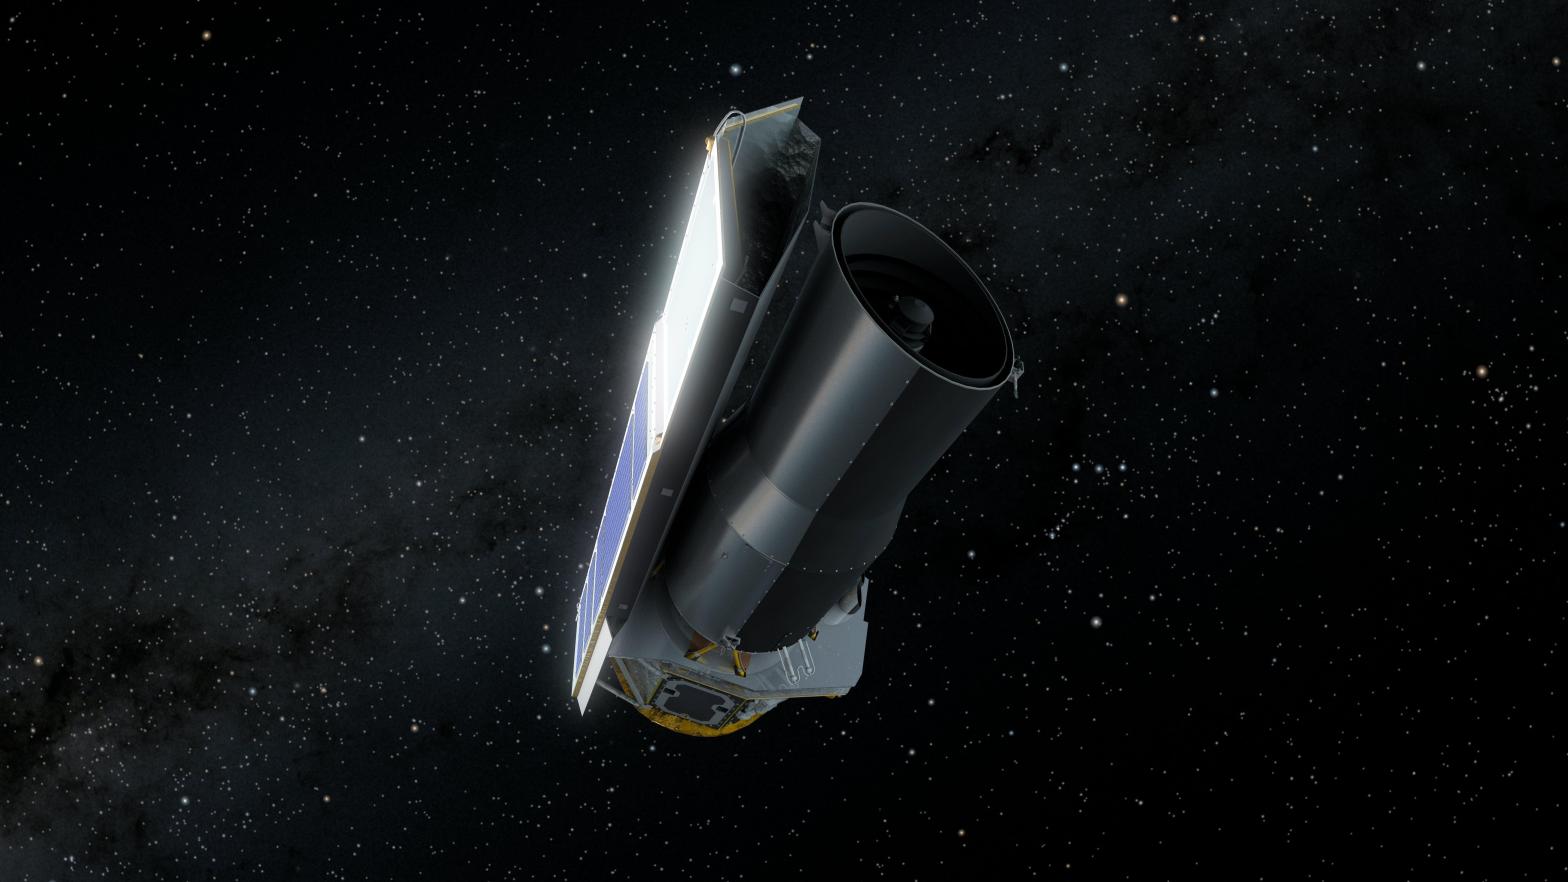 An illustration of NASA's Spitzer Space Telescope, which retired in 2020. (Illustration: NASA/JPL-Caltech)